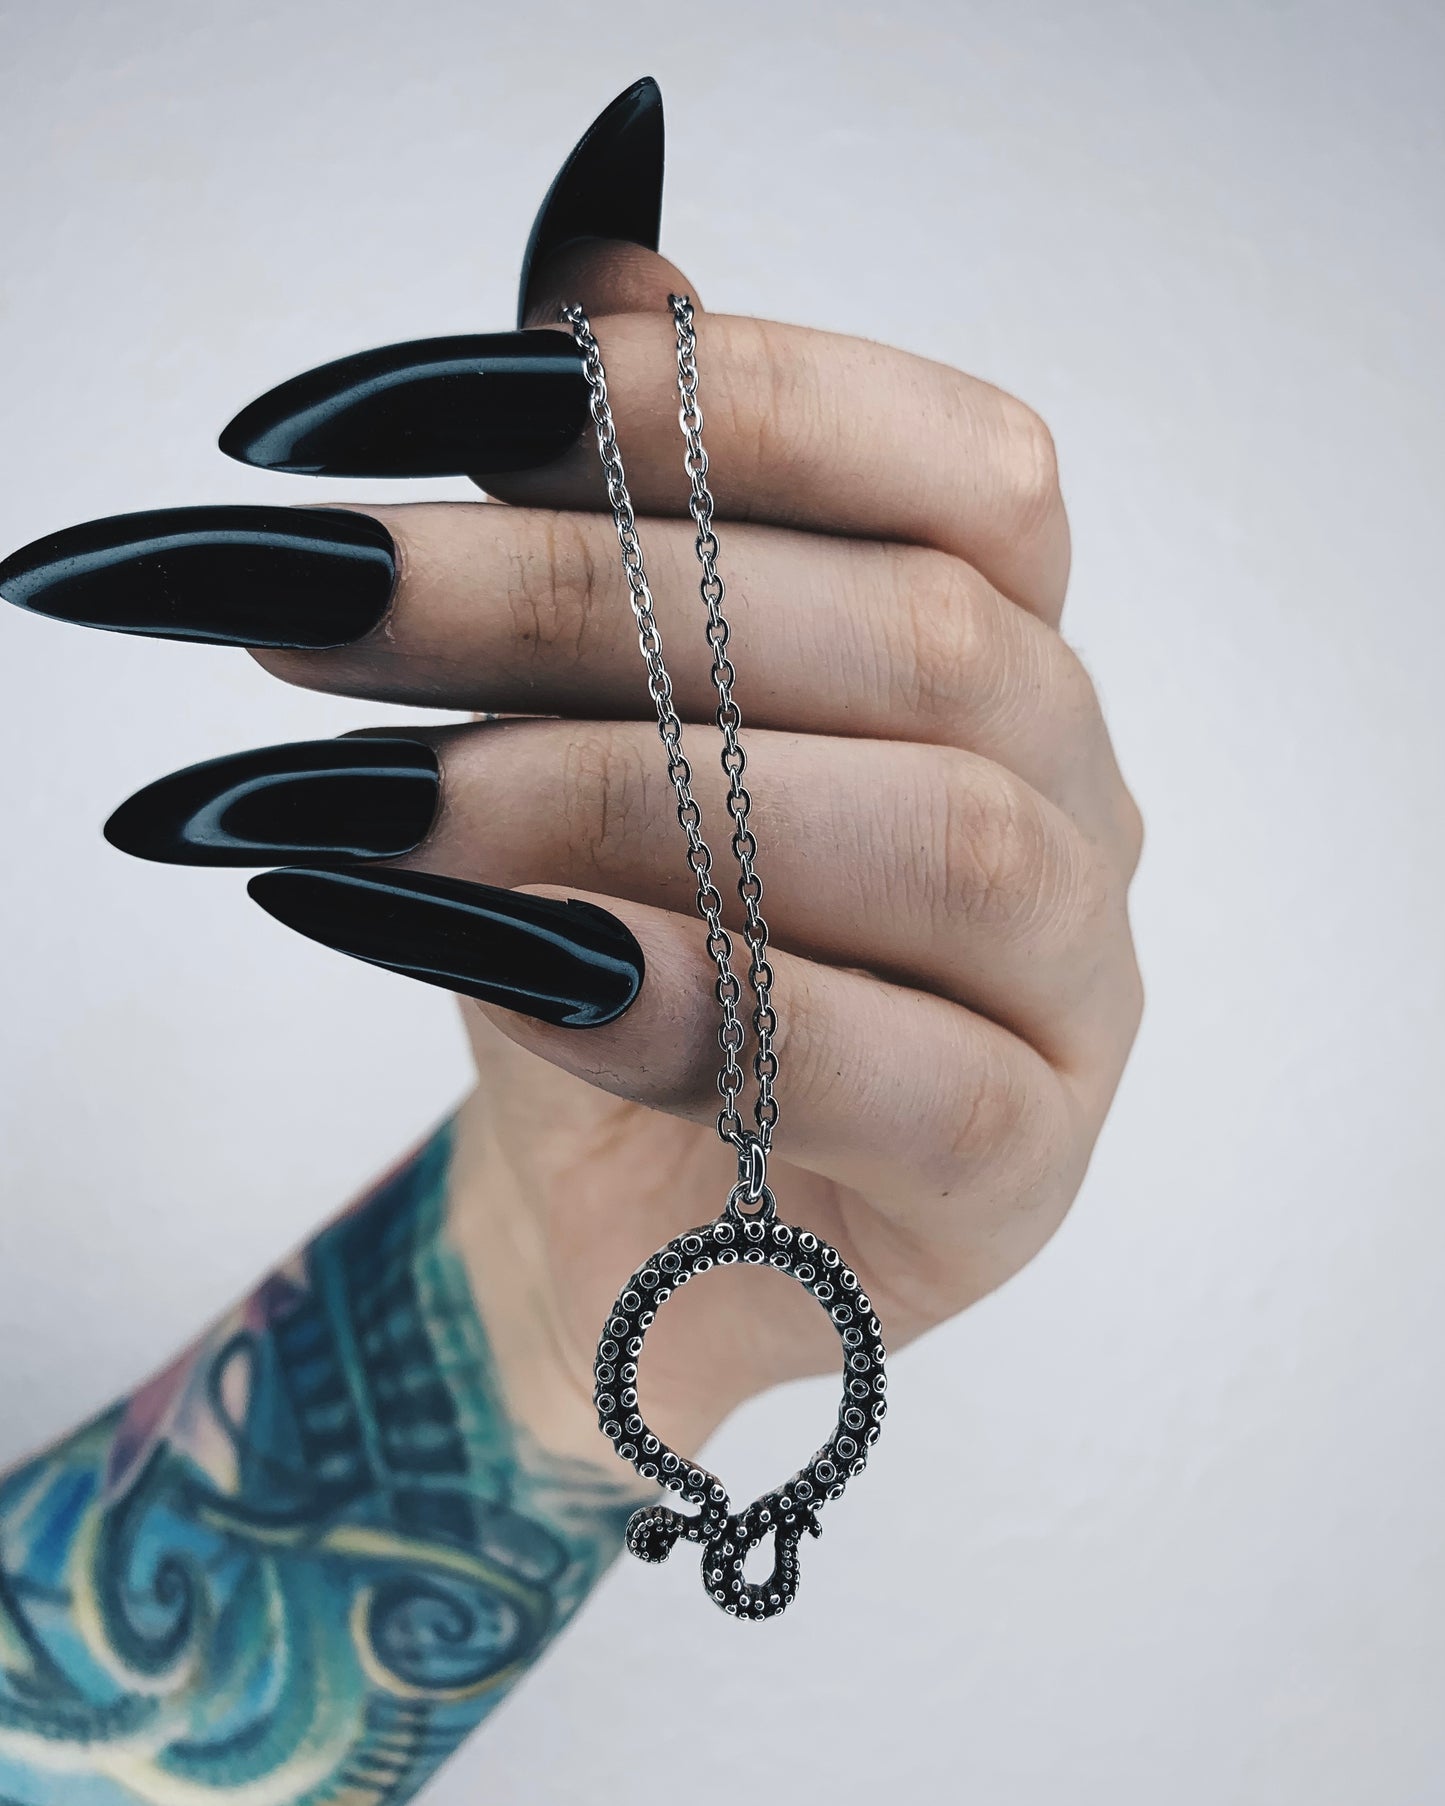 Tentacle necklace